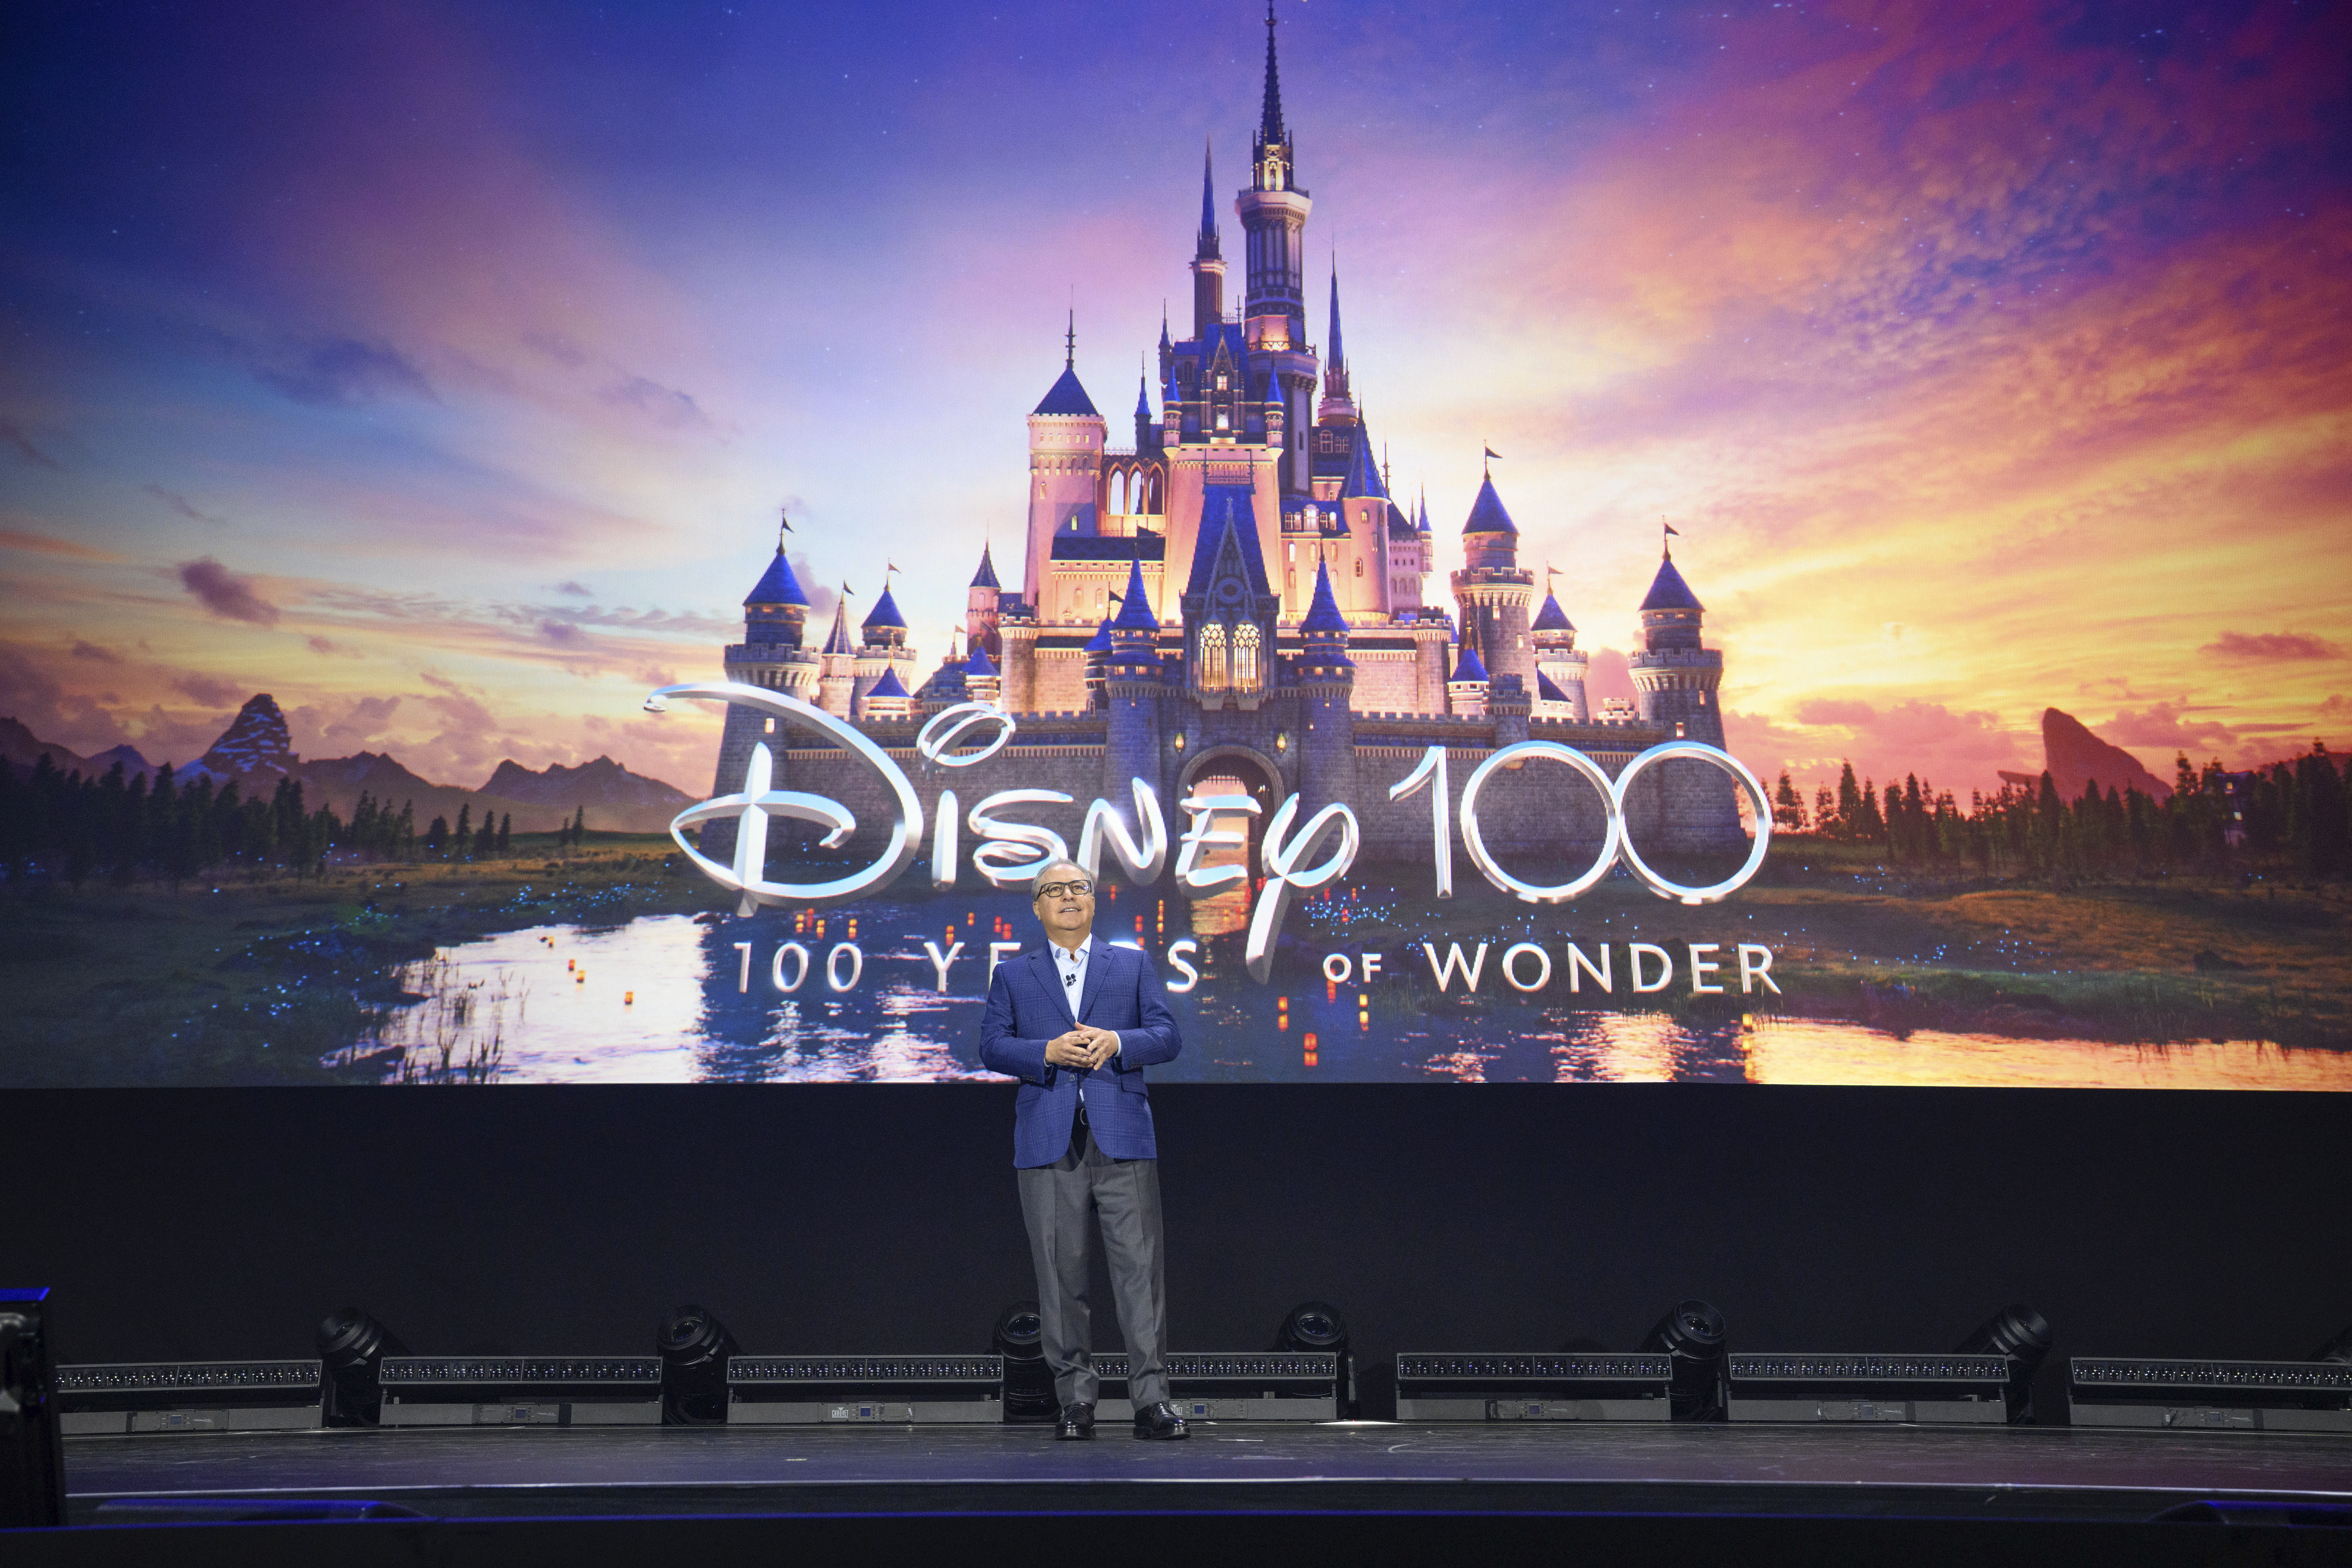 New Details About Disney 100 Years of Wonder Revealed to Fans During D23  Expo - The Walt Disney Company